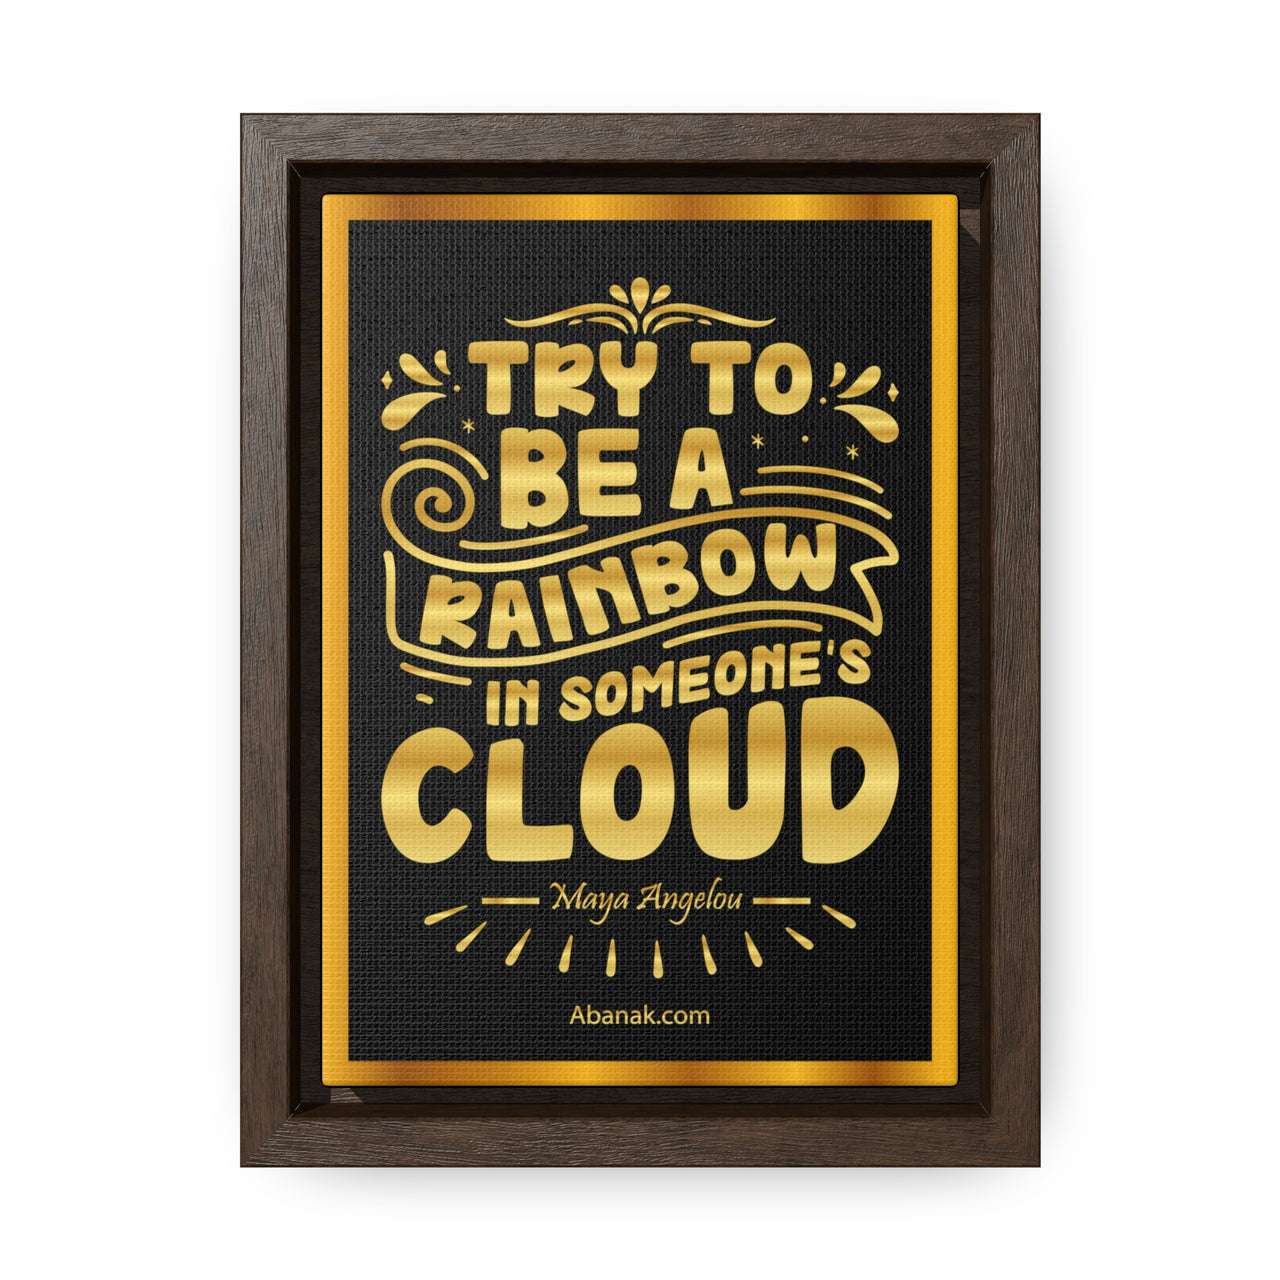 Be a Rainbow in Someone's Cloud - Maya Angelou - Framed Canvas Print